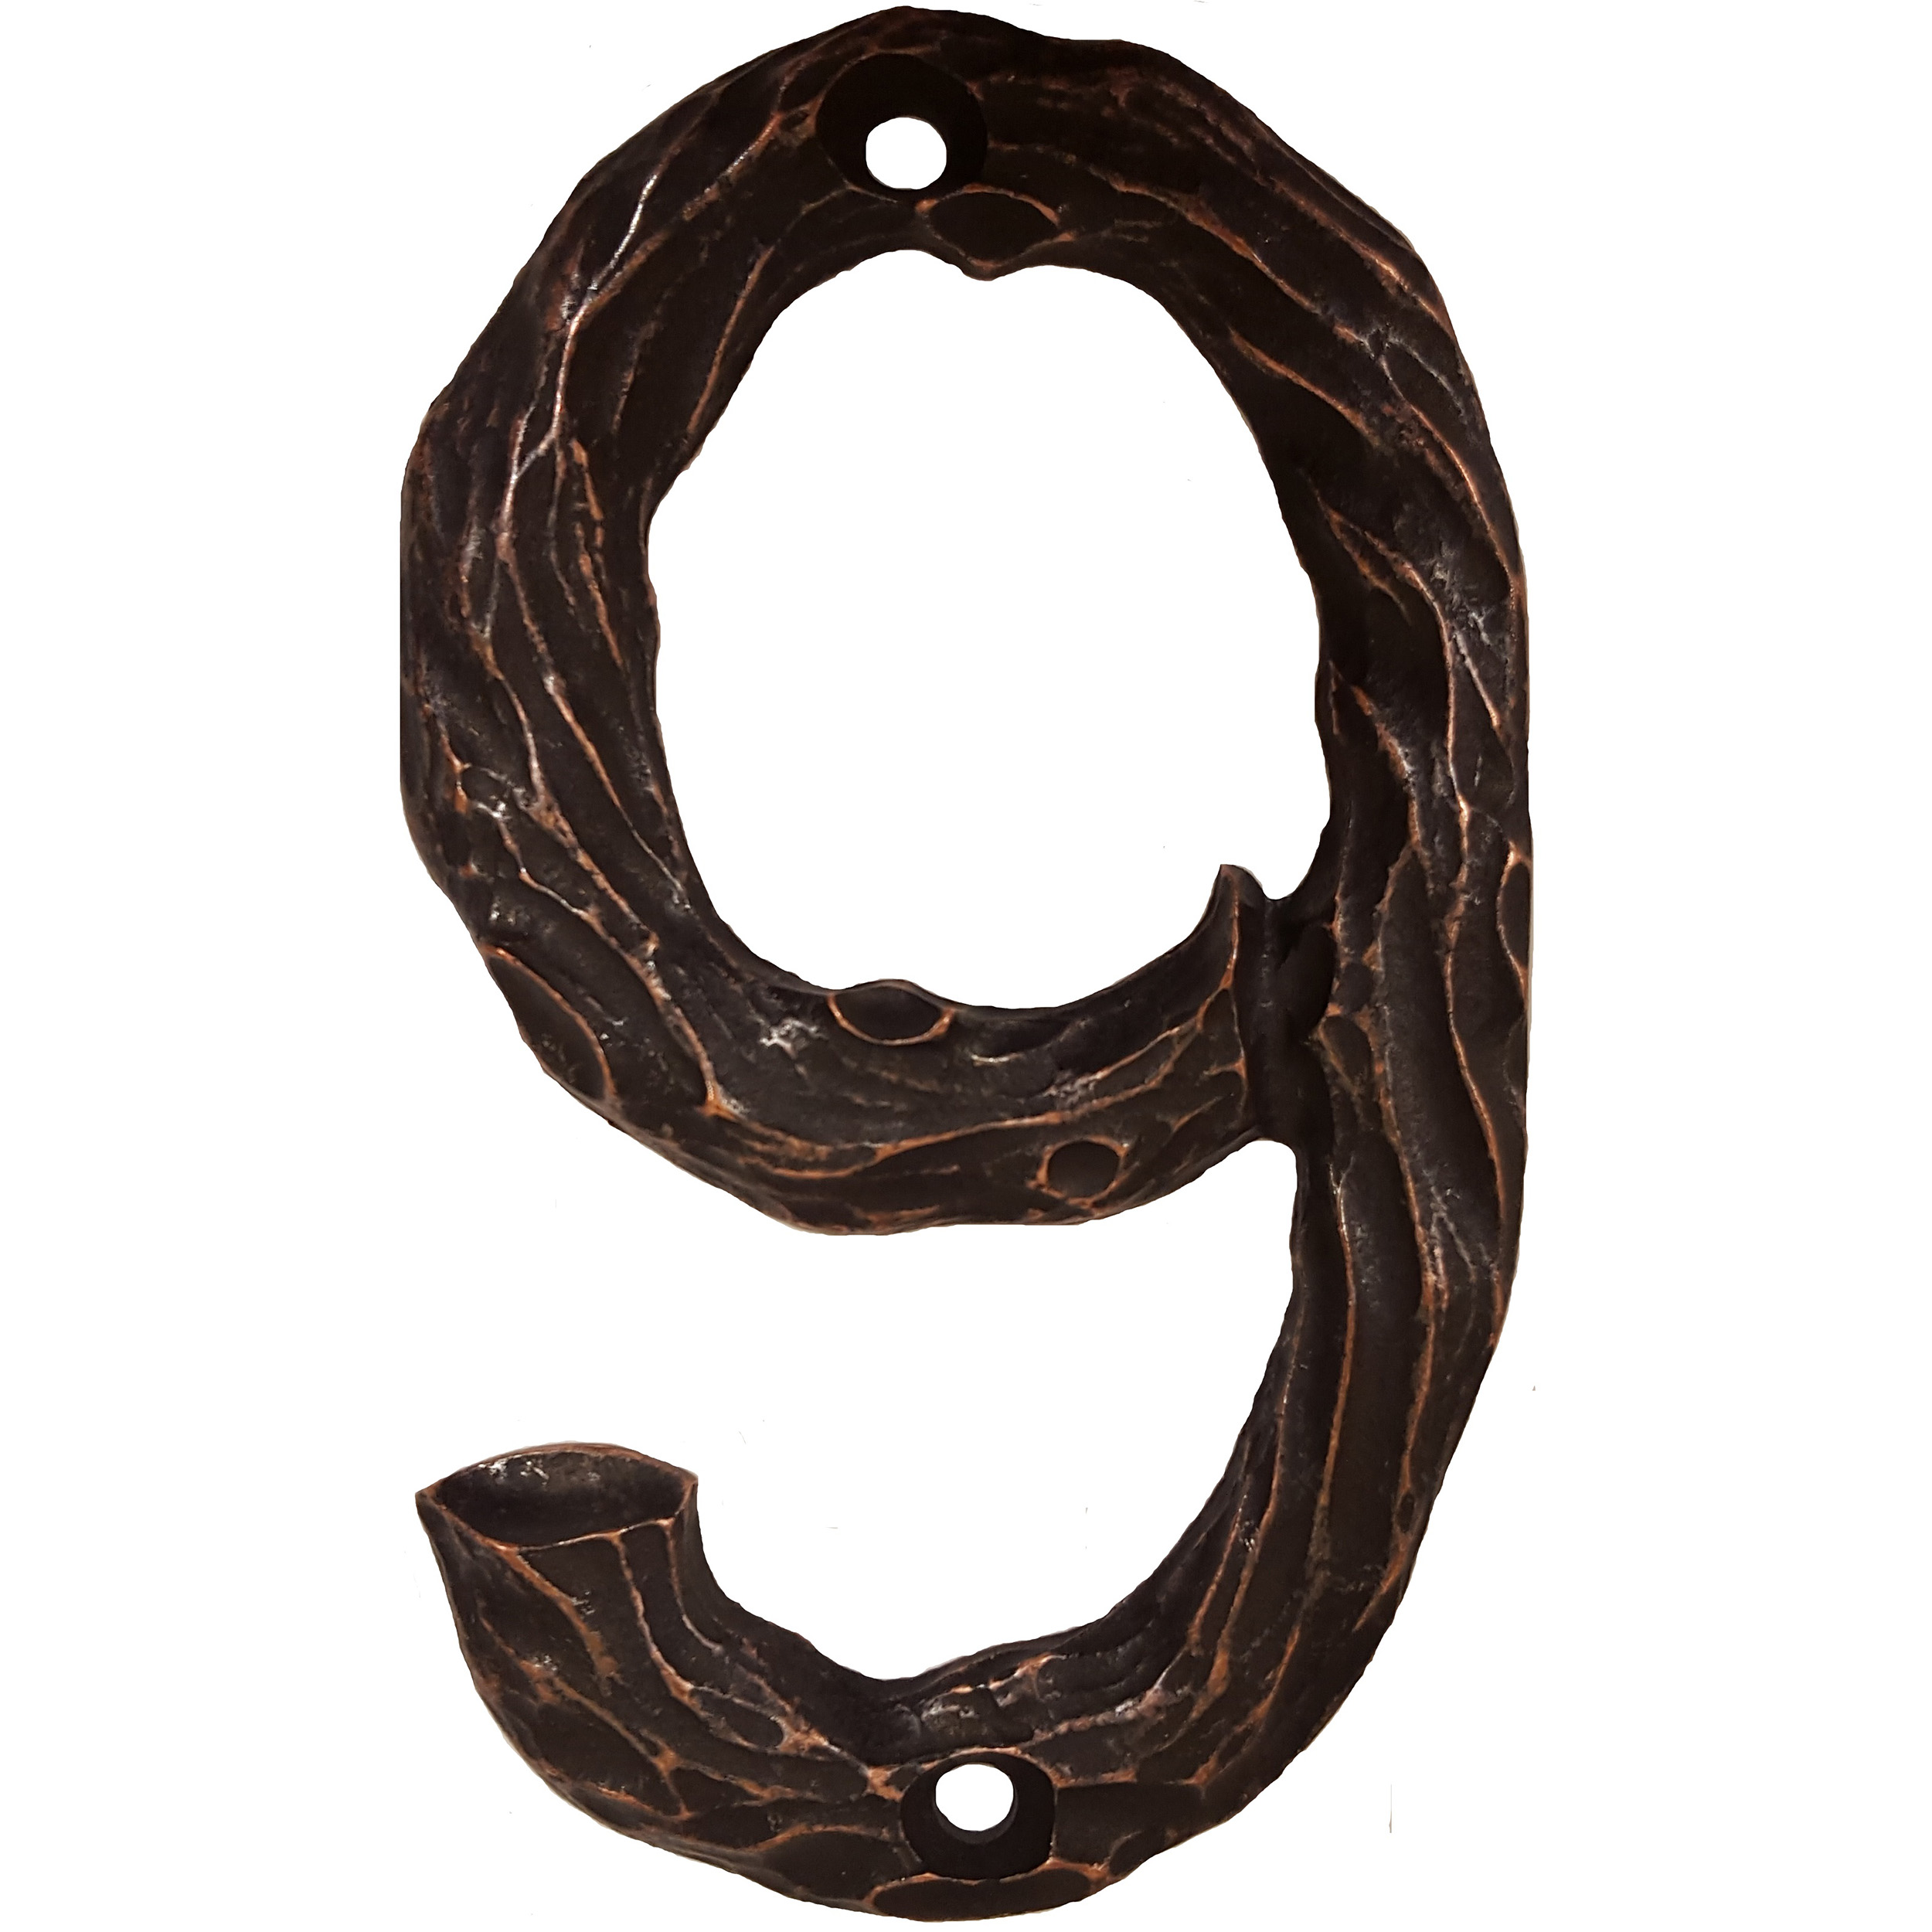 Lhn9-orb Log House Number 9, Oil Rubbed Bronze, 1 Piece